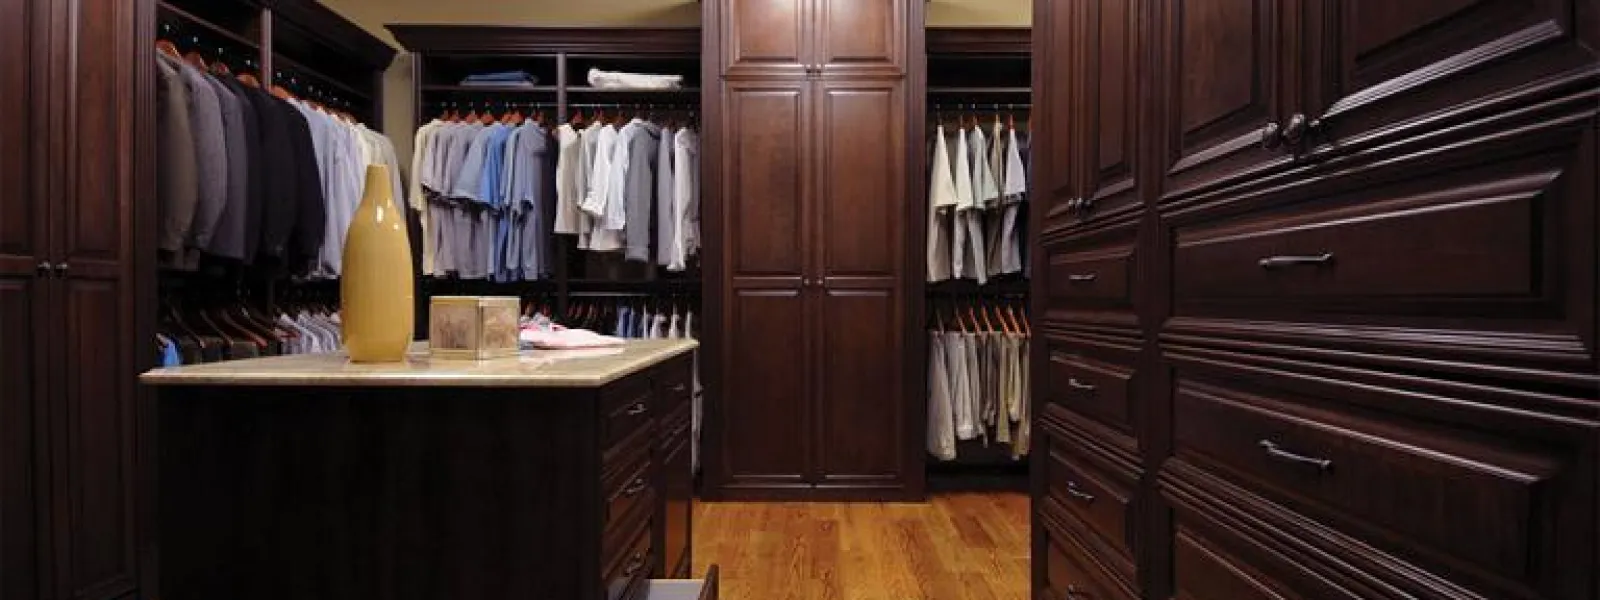 Spoil Your Atlanta Home With Wood-Stained, Custom Closets